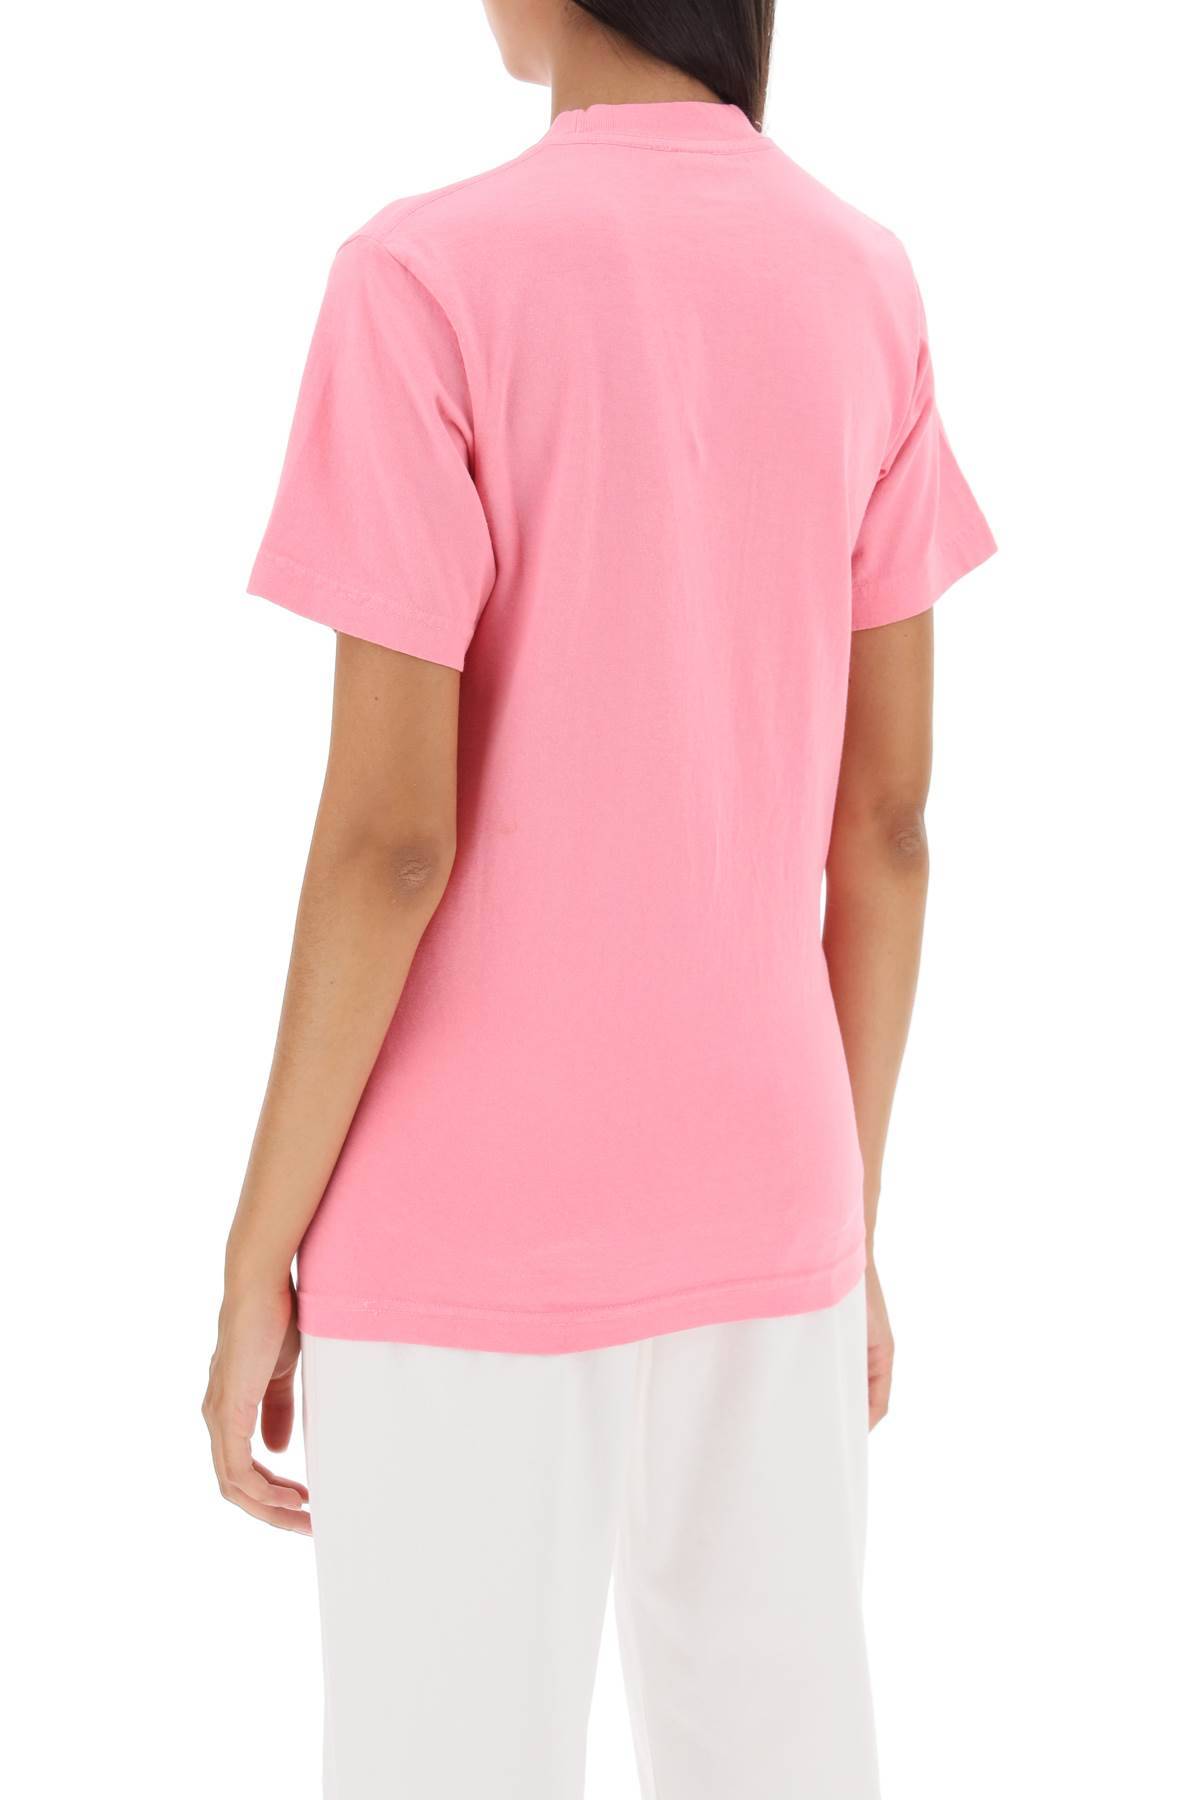 Shop Sporty And Rich Health Wealth 94 T-shirt In Pink